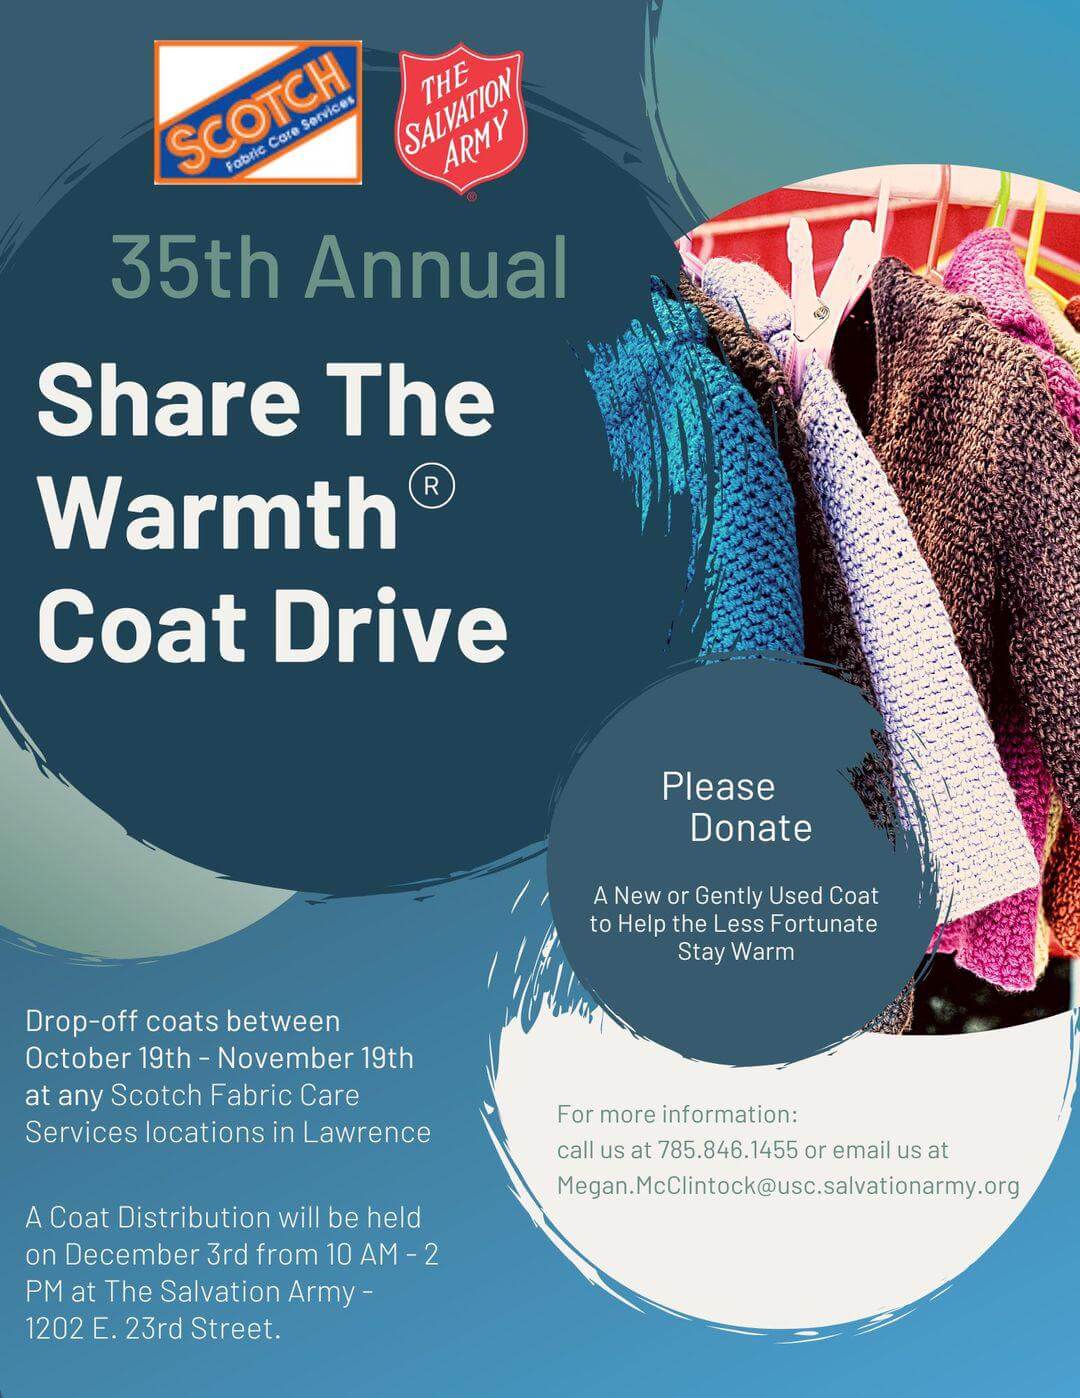 Salvation Army Share The Warmth Coat Drive flyer